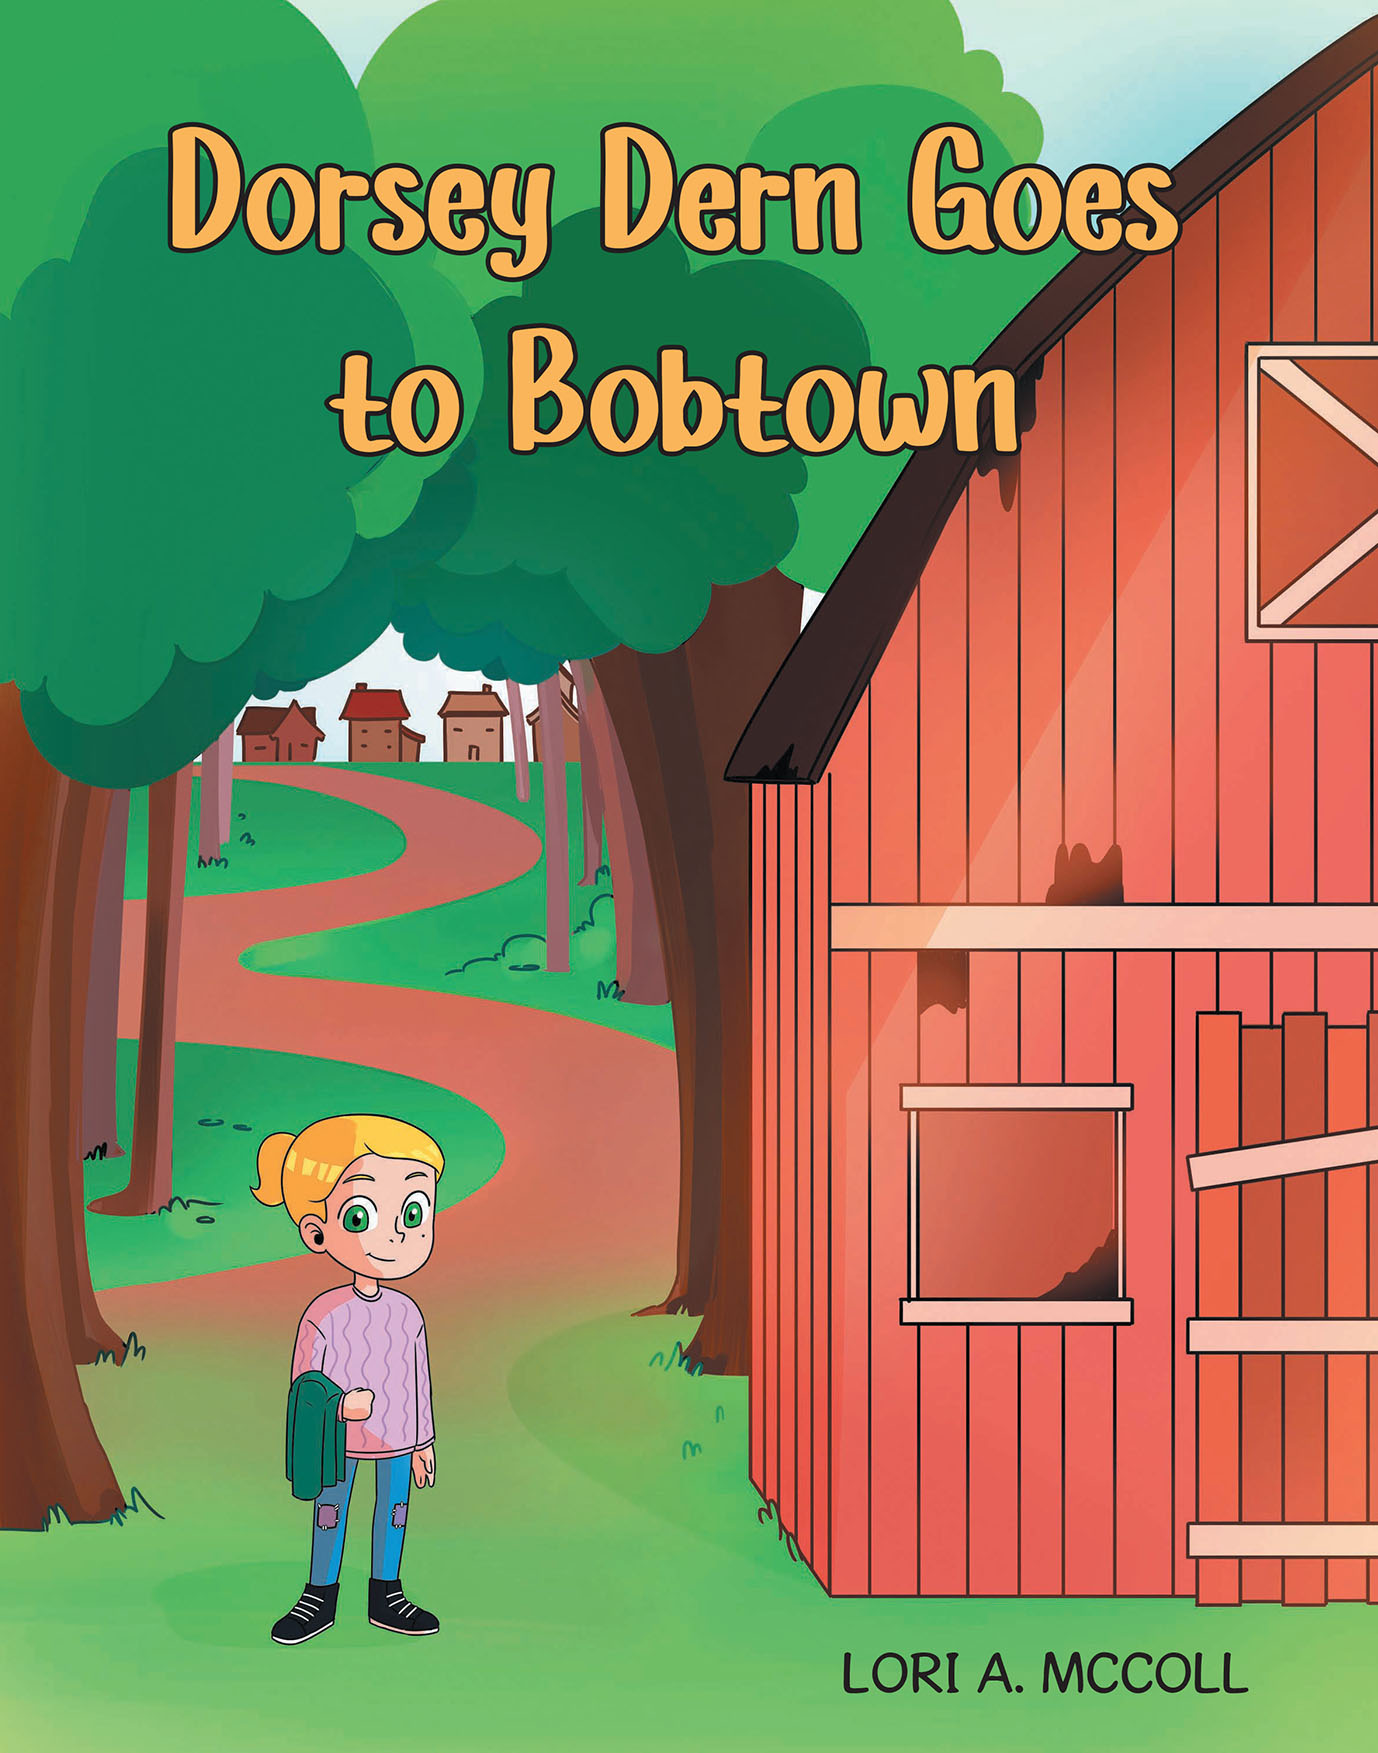 Author Lori A. McColl’s New Book, “Dorsey Dern Goes to Bobtown,” Follows a Young Girl’s Adventure to Visit Her Aunt Despite Her Mother’s Warnings Not to Go by Herself